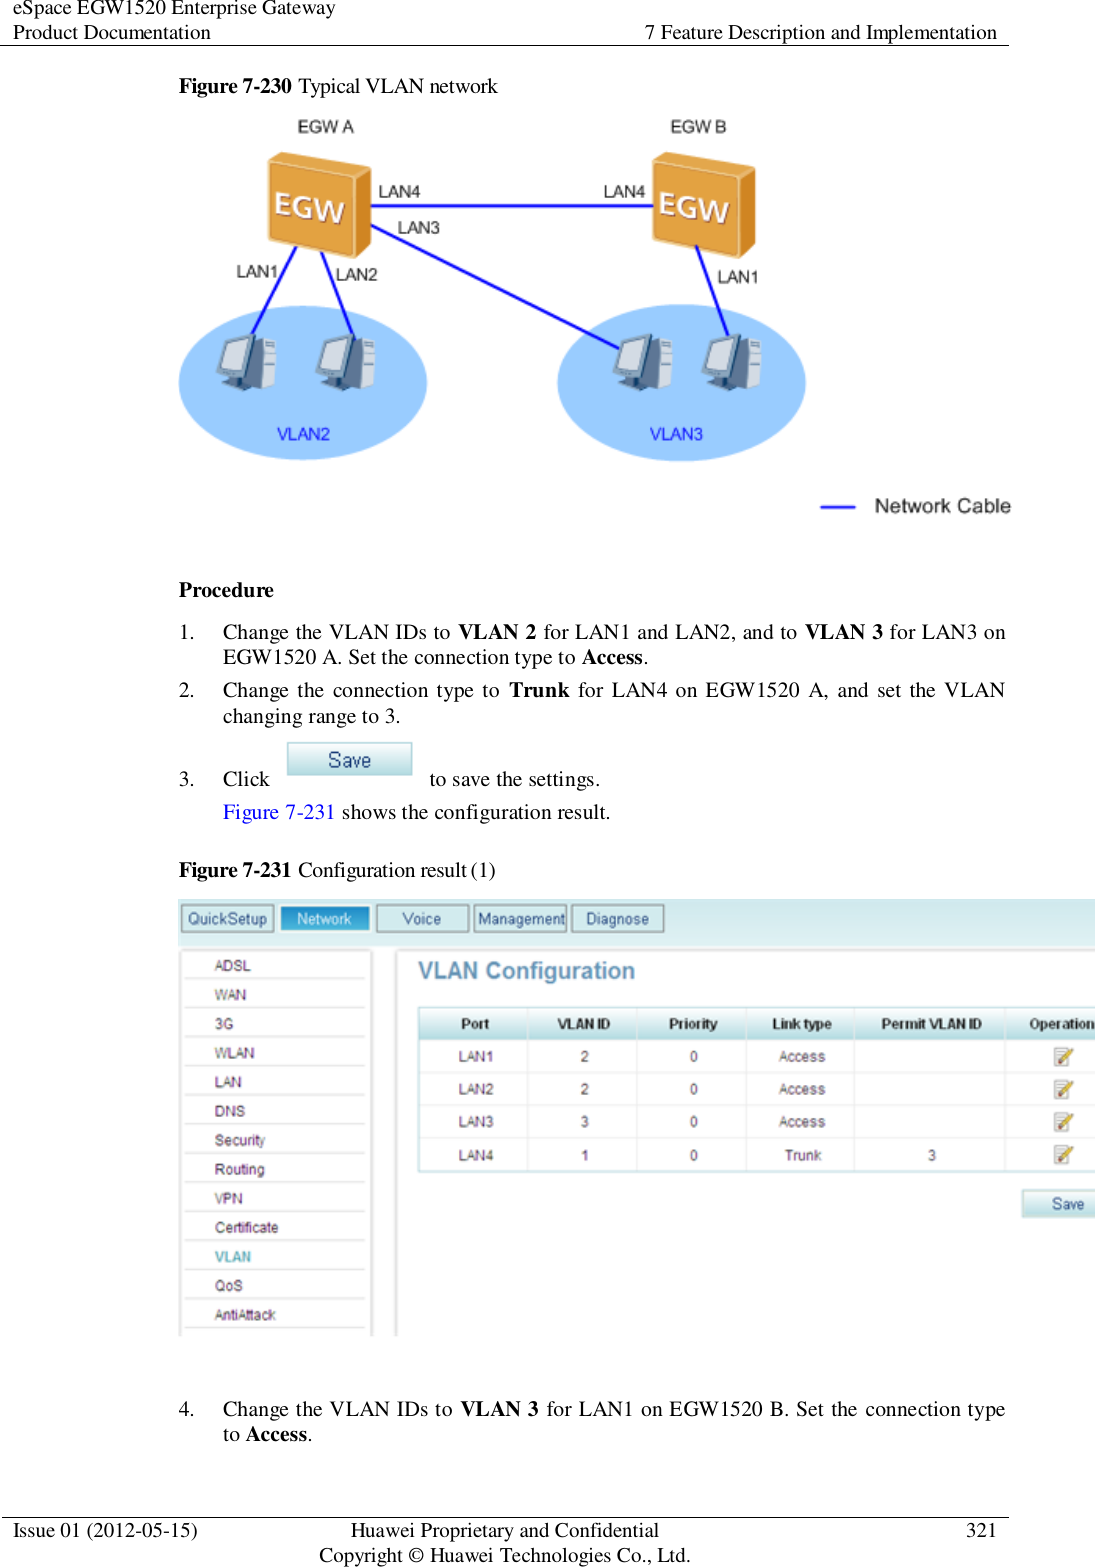 eSpace EGW1520 Enterprise Gateway Product Documentation 7 Feature Description and Implementation  Issue 01 (2012-05-15) Huawei Proprietary and Confidential                                     Copyright © Huawei Technologies Co., Ltd. 321  Figure 7-230 Typical VLAN network   Procedure 1. Change the VLAN IDs to VLAN 2 for LAN1 and LAN2, and to VLAN 3 for LAN3 on EGW1520 A. Set the connection type to Access. 2. Change the  connection type to  Trunk  for LAN4 on EGW1520 A, and set the VLAN changing range to 3. 3. Click    to save the settings. Figure 7-231 shows the configuration result. Figure 7-231 Configuration result (1)   4. Change the VLAN IDs to VLAN 3 for LAN1 on EGW1520 B. Set the connection type to Access. 